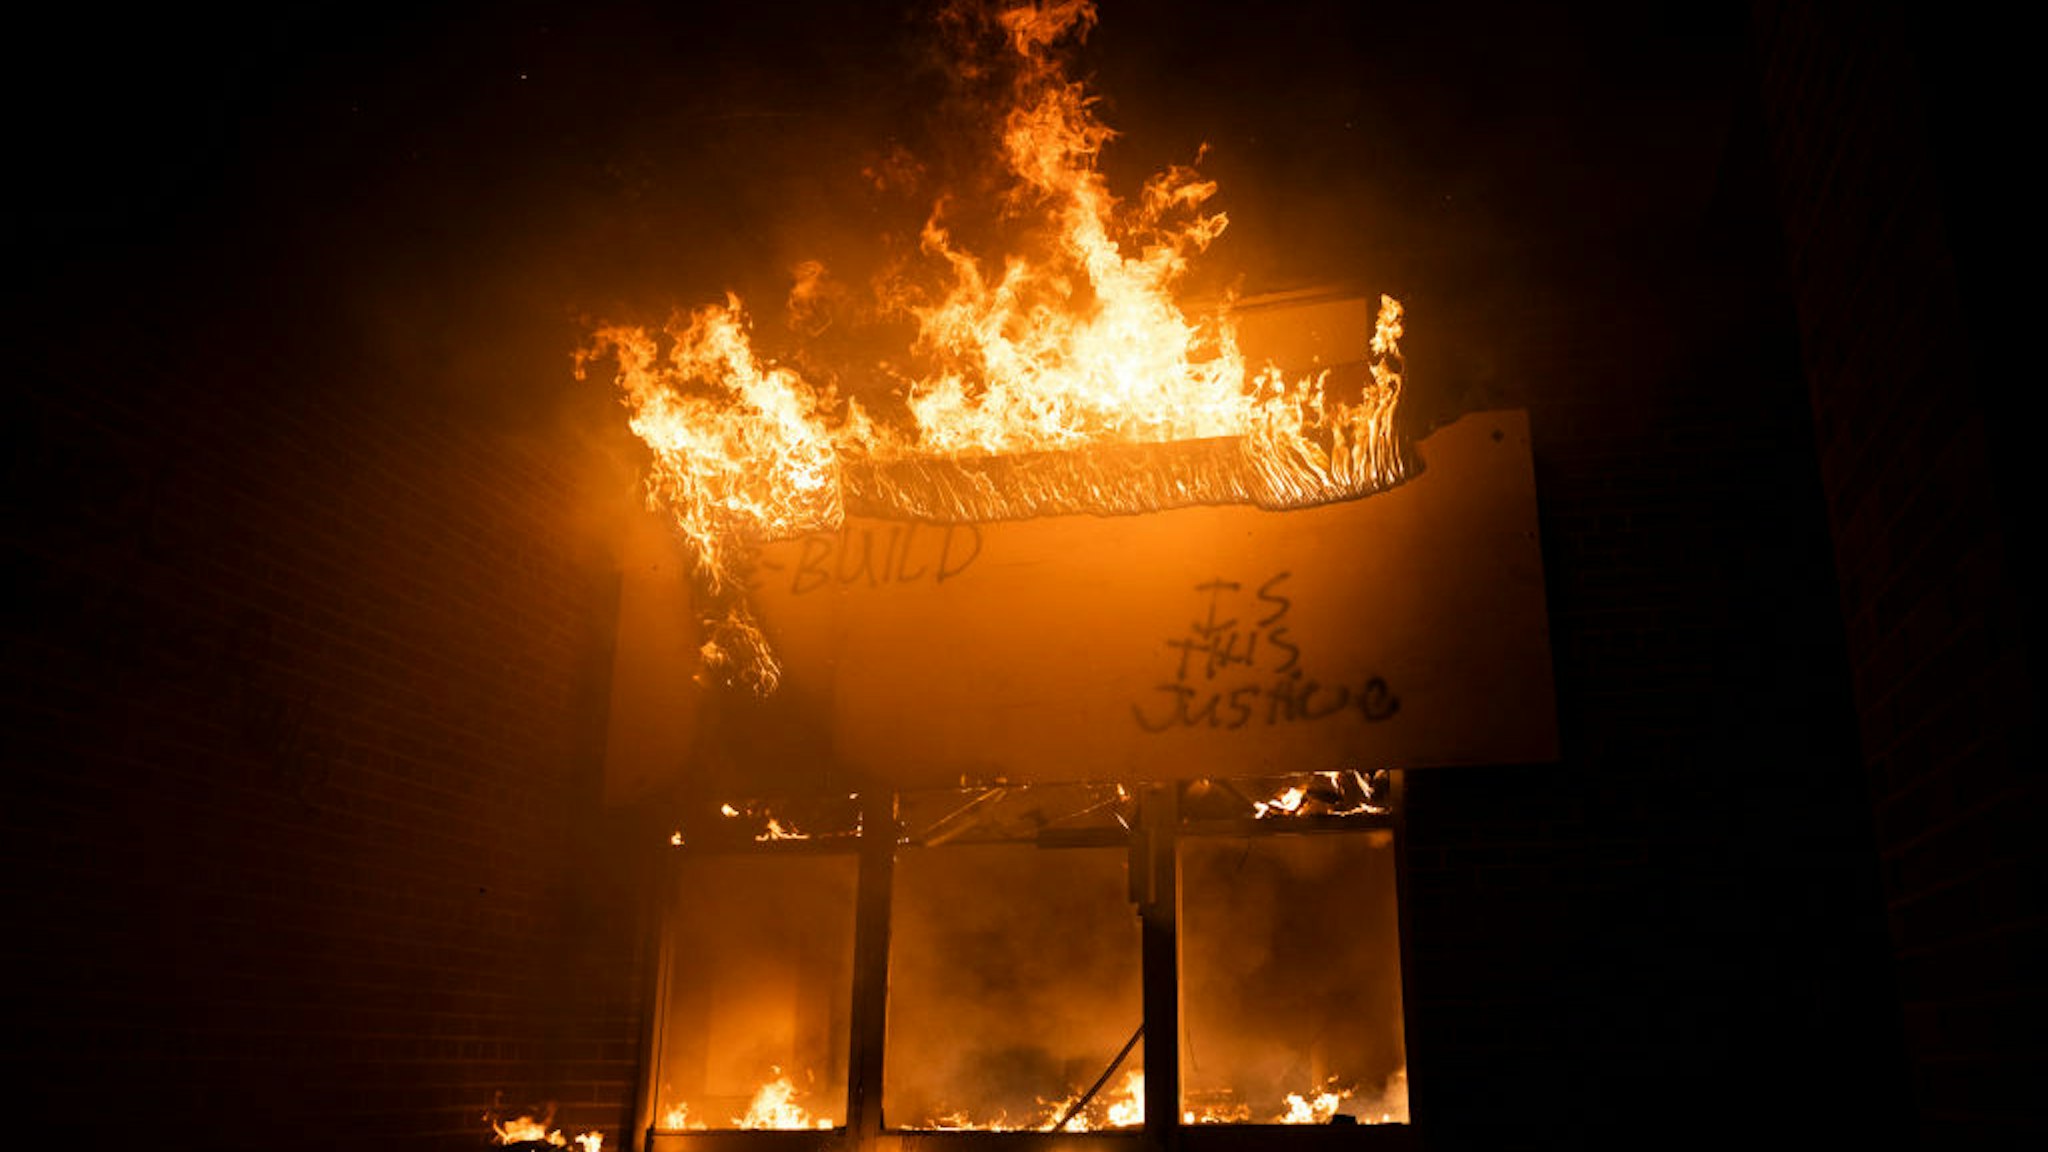 fire burns at a Post Office on May 29, 2020 in Minneapolis, Minnesota. Protests have been ongoing in the state and around the country since George Floyd's death while in police custody on Monday.